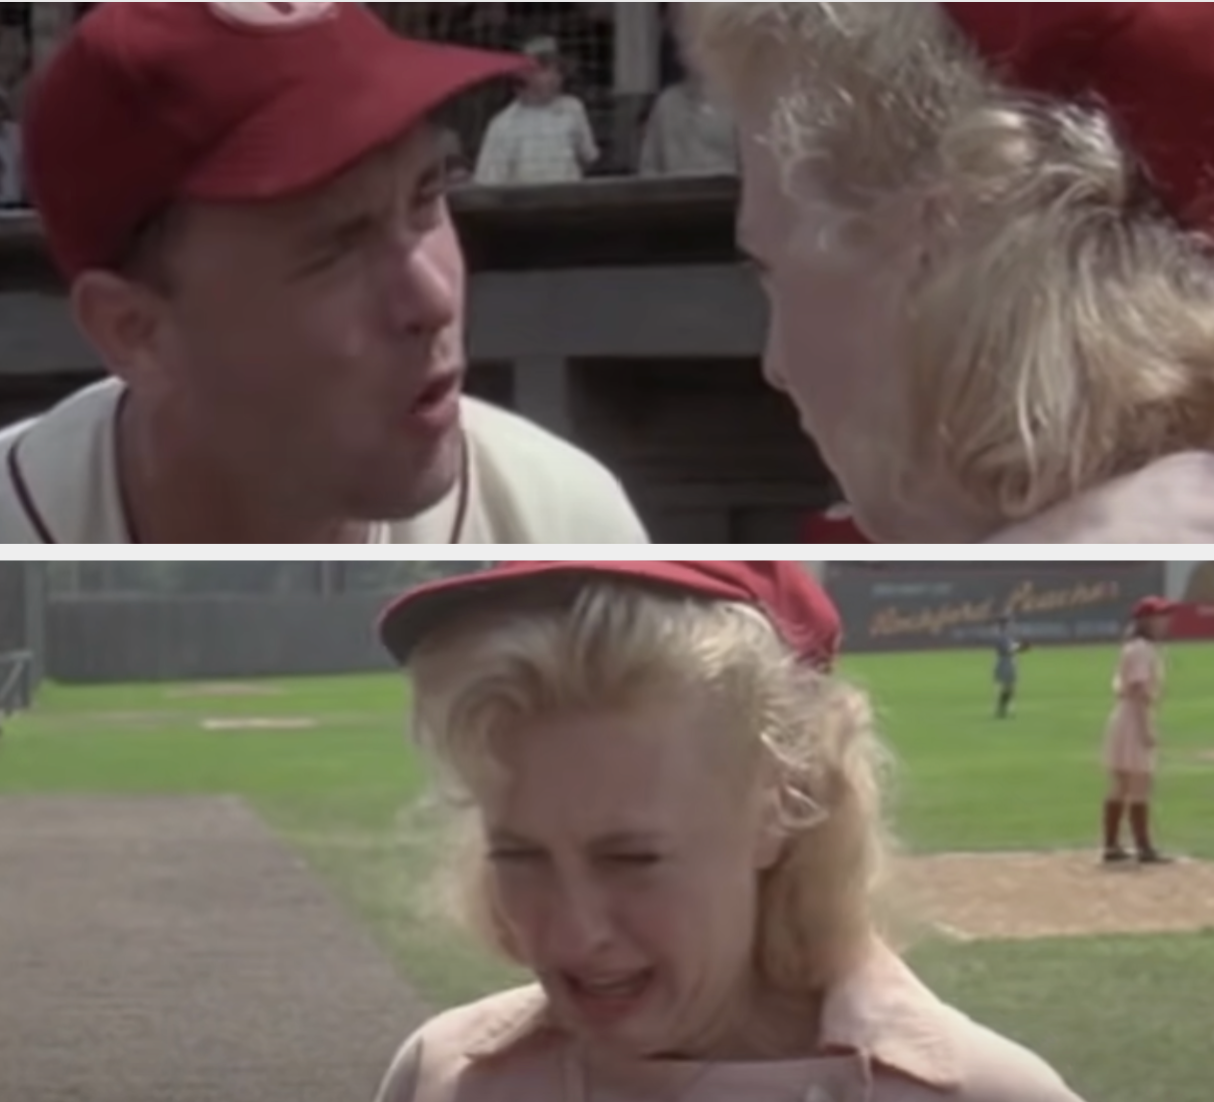 Hanks in A league of their own yells at Tracy Nelson as Evelyn in the &quot;There&#x27;s no crying in baseball&quot; scene